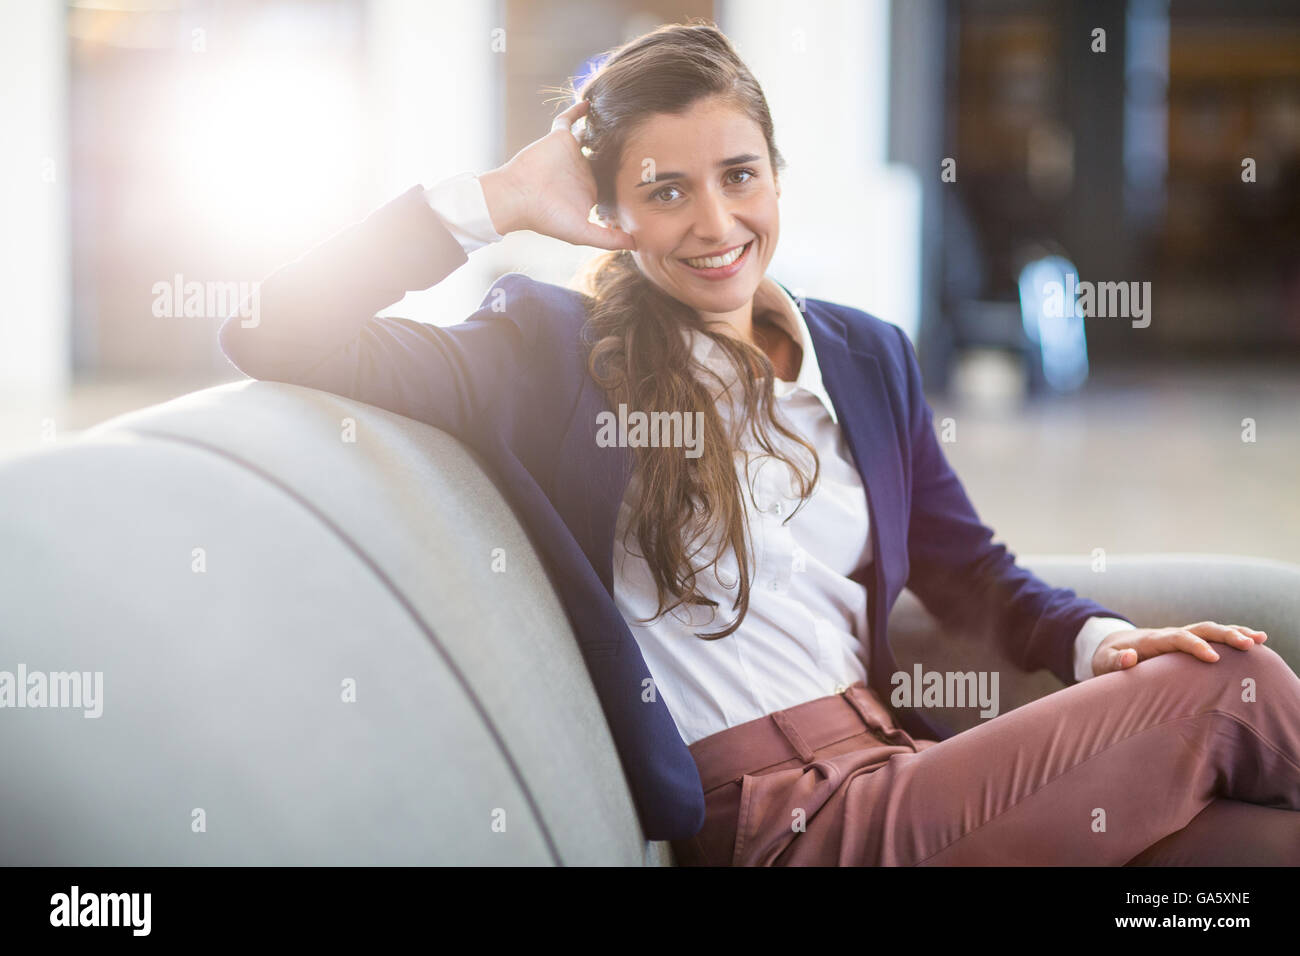 Portrait of smiling woman sitting in office Banque D'Images